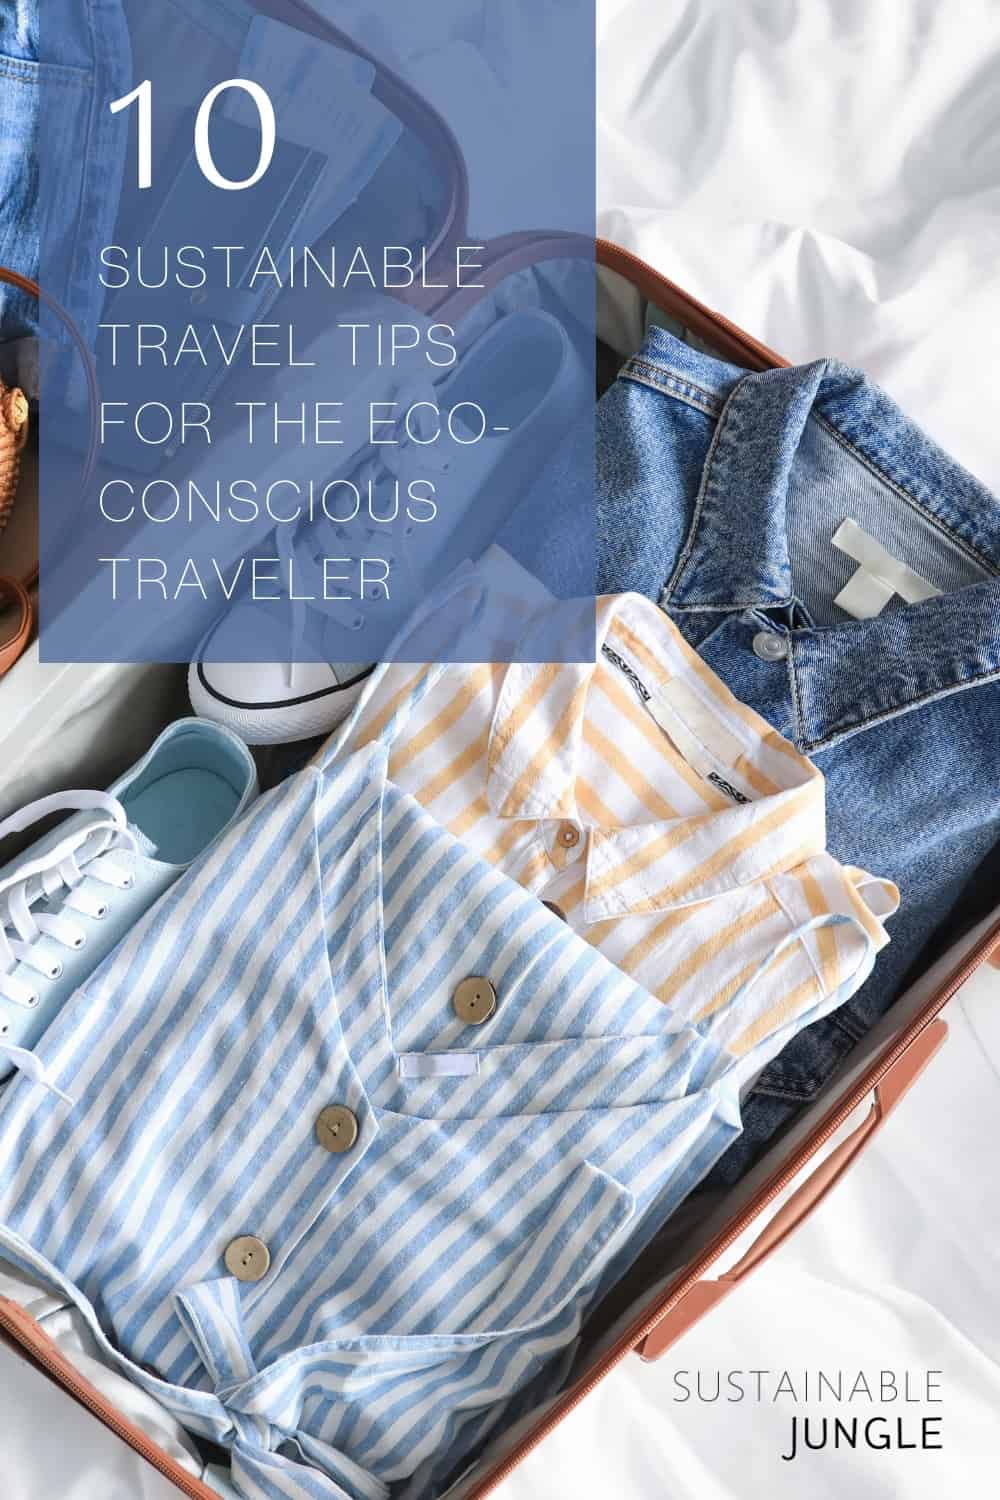 10 Sustainable Travel Tips For The Eco-Conscious Traveler #sustainabletravel #ecofriendlytravel #environmentallyfriendlytravel #sustainabletraveltips #sustainablejungle Image by pixelshot via Canva Pro